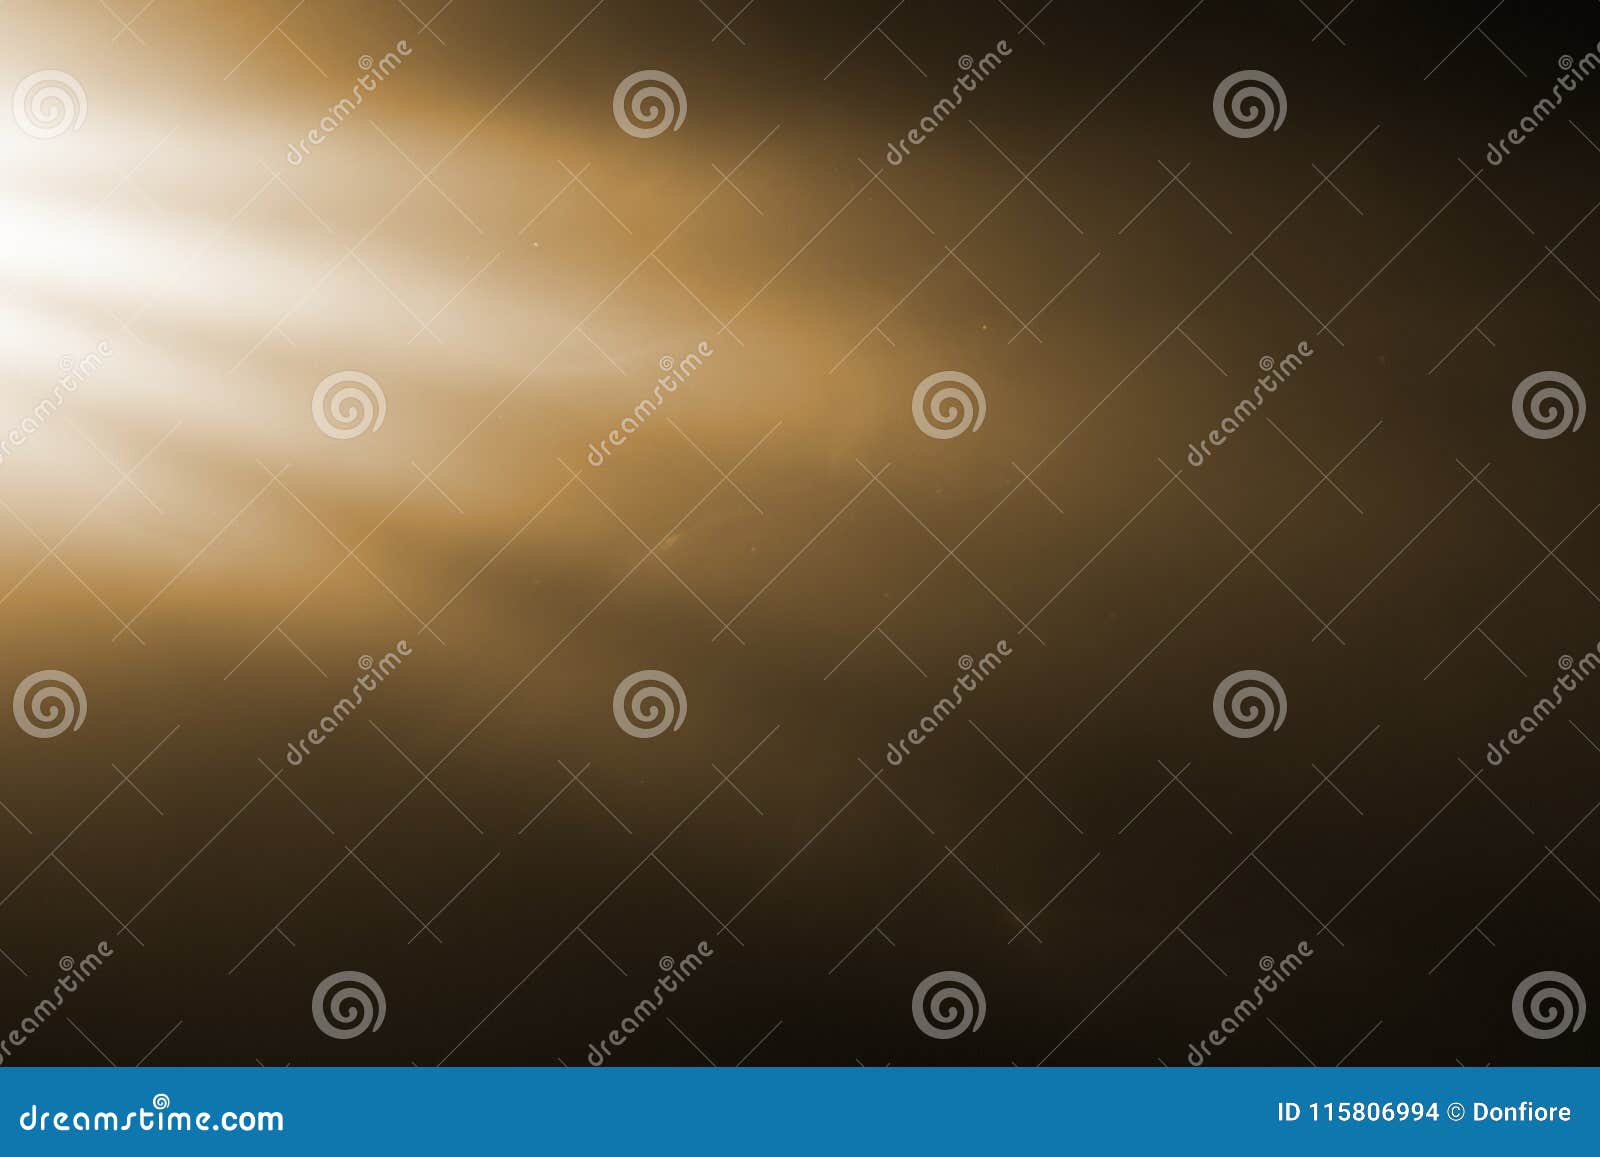 gold warm color bright lens flare rays flashes leak for transitions on black background,movie titles and overlaying